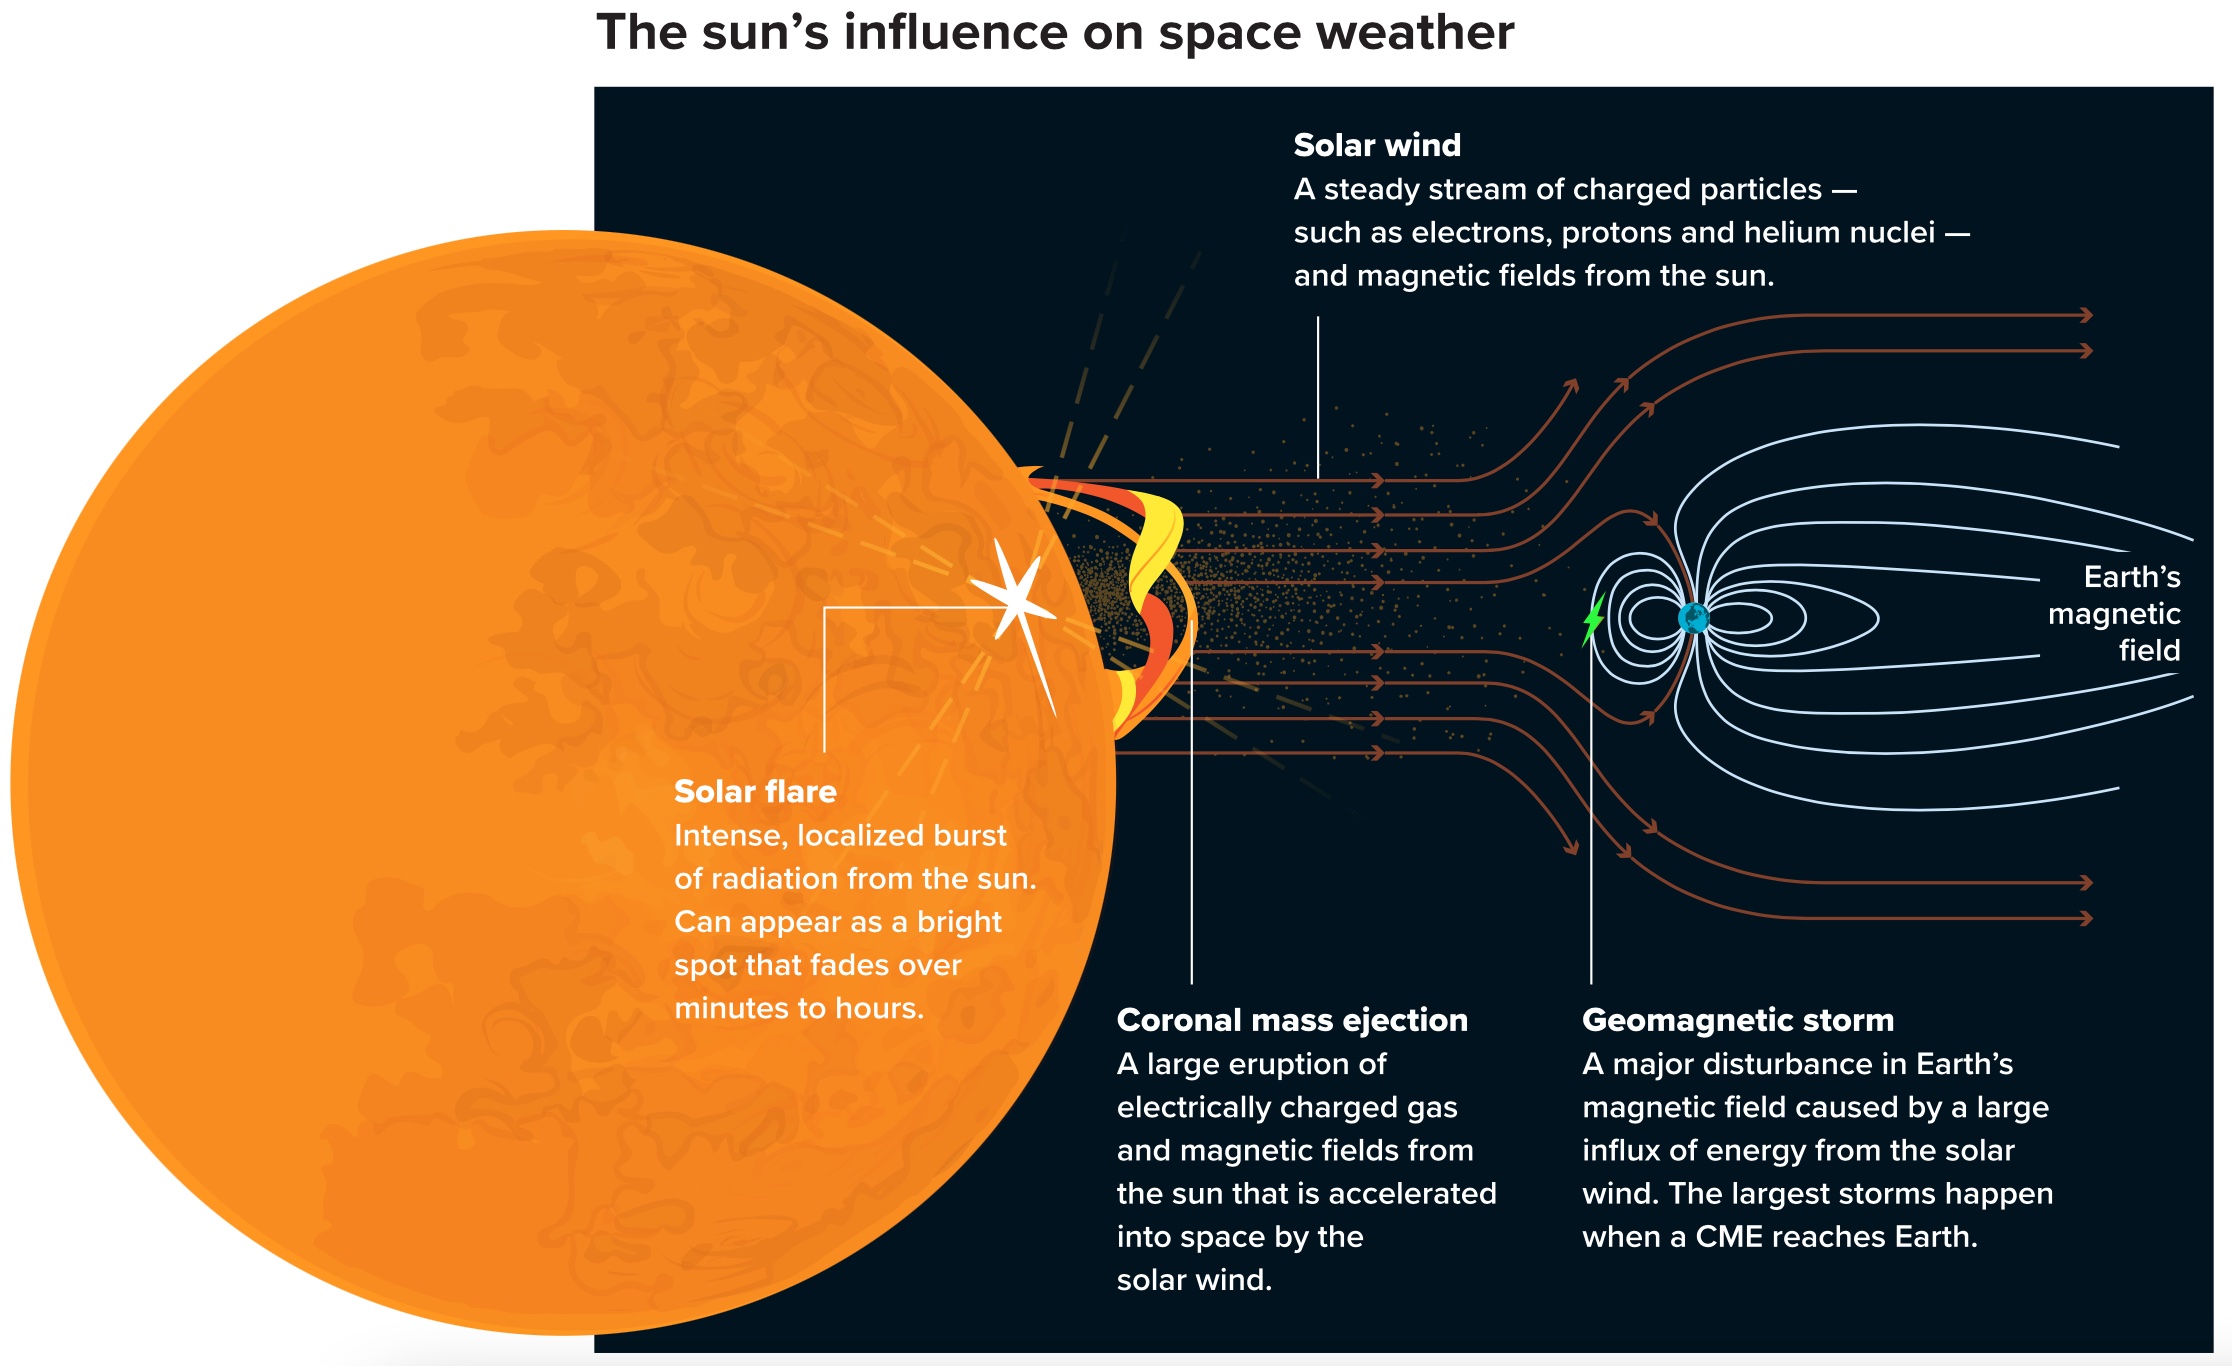 the sun's influence on space weather.